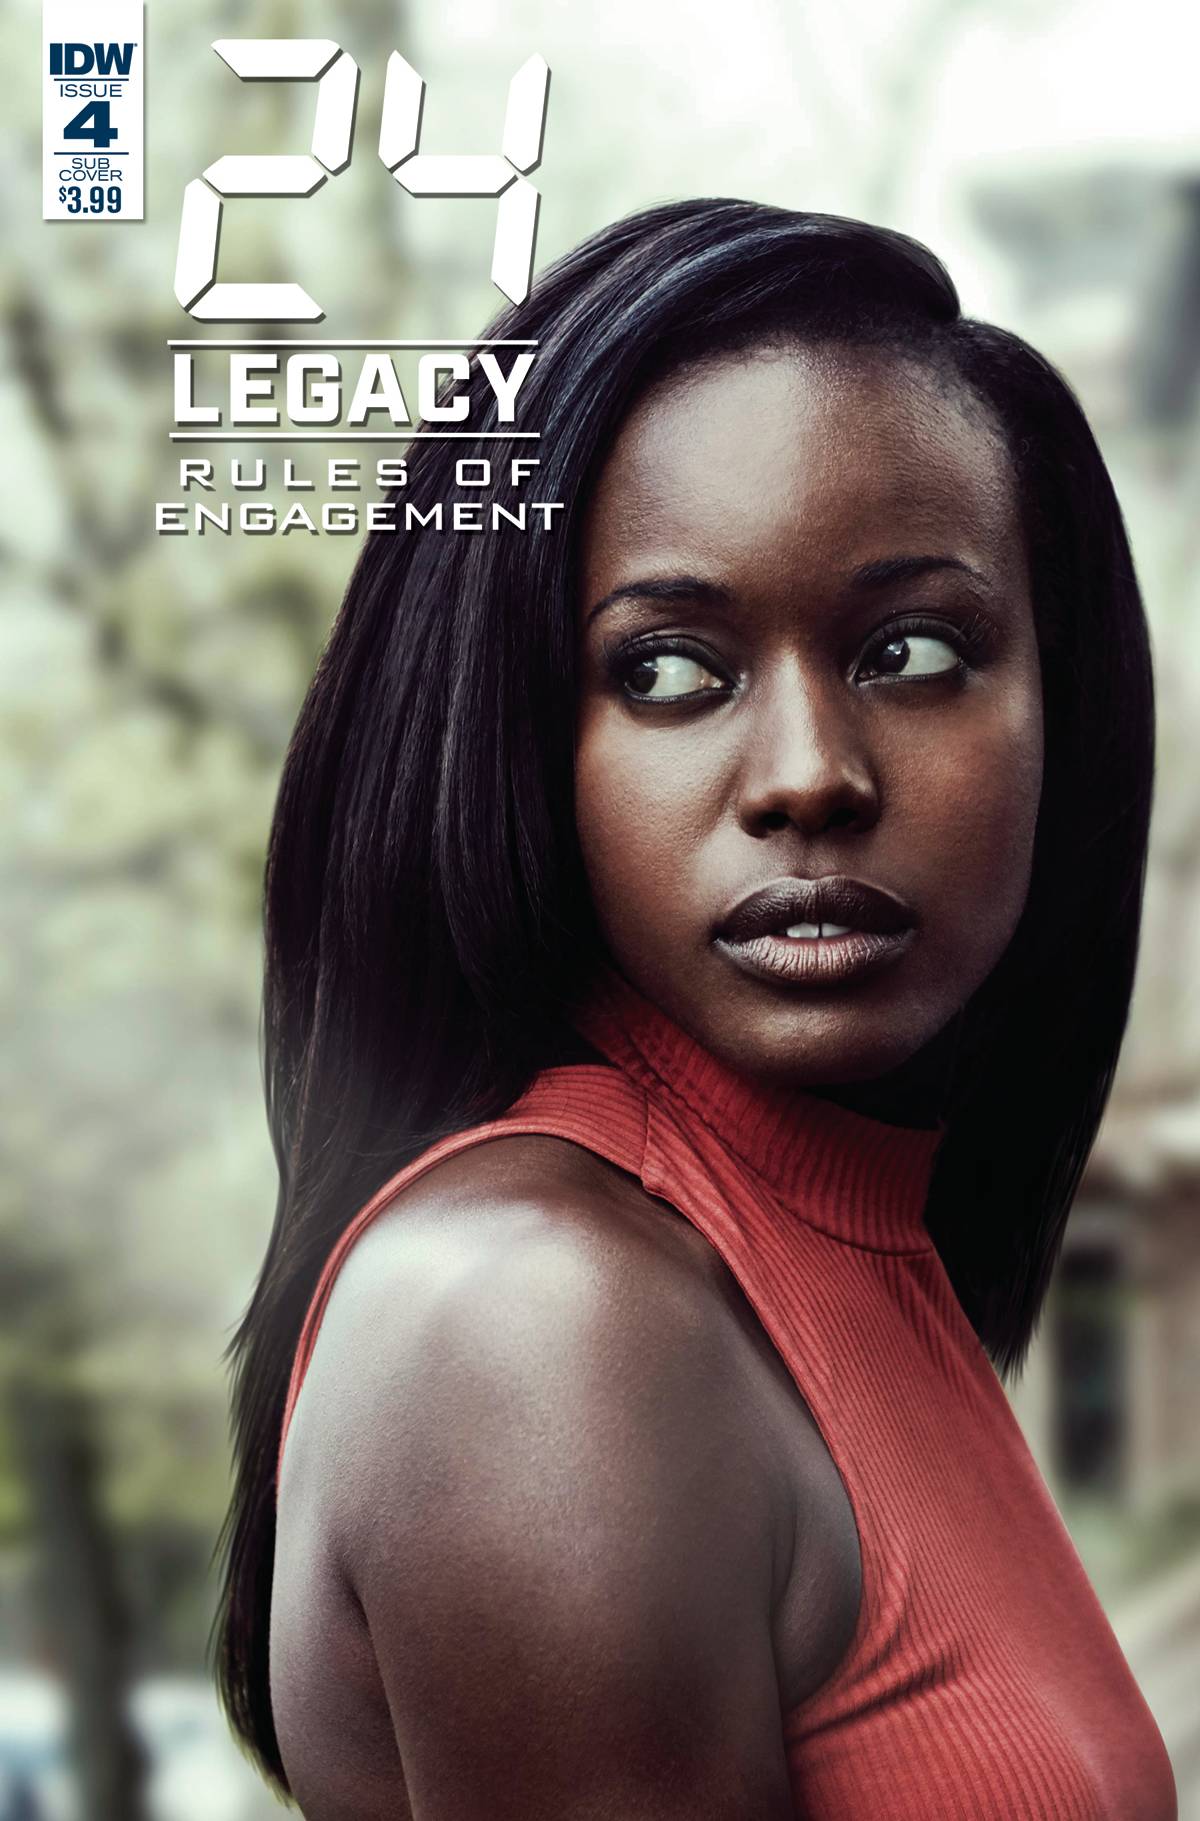 24: LEGACY--RULES OF ENGAGEMENT#4